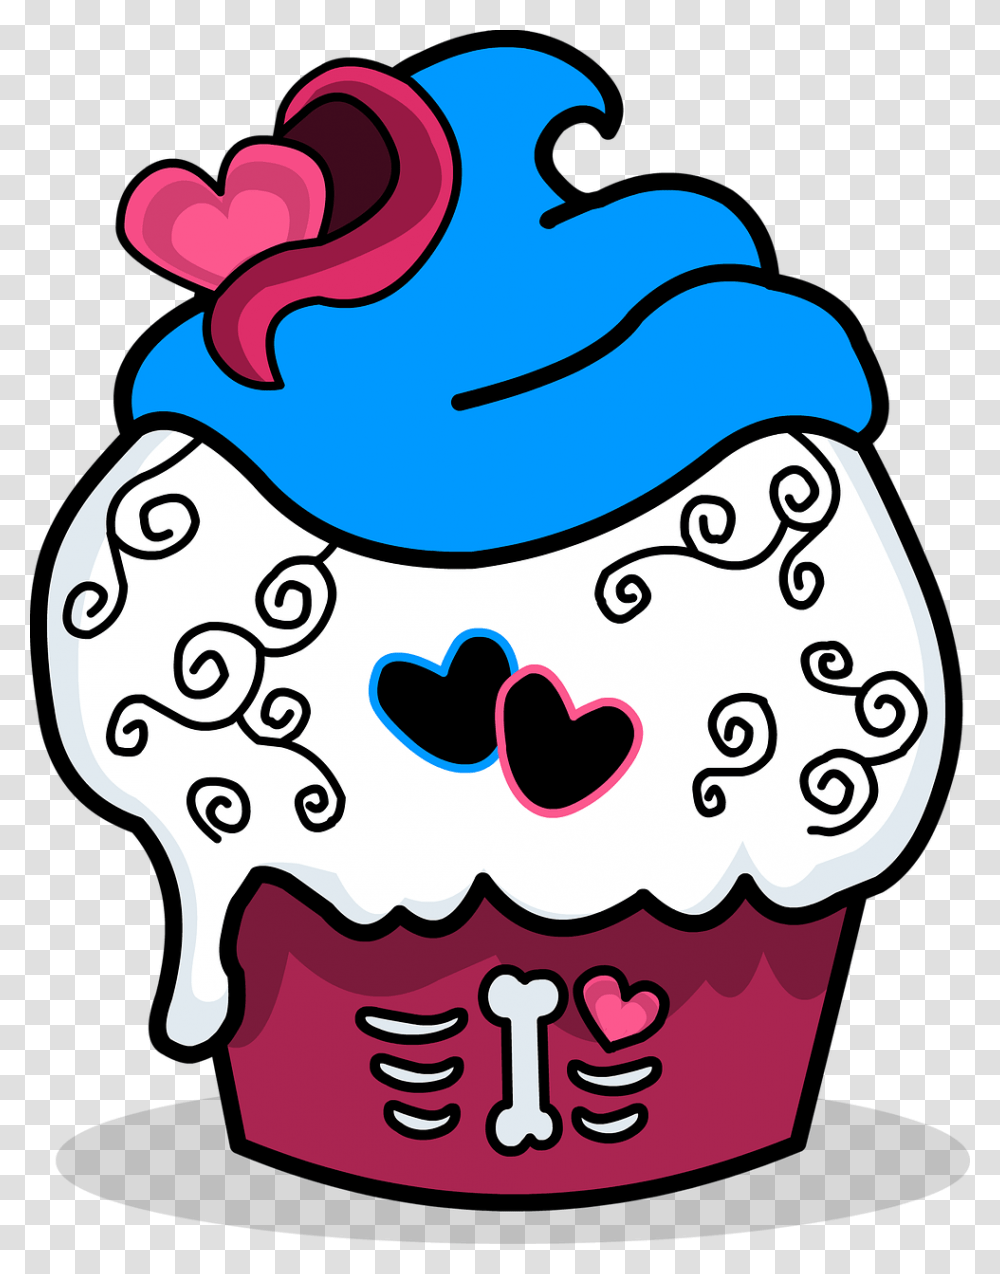 Zombie Sugar Skull Free Picture Cupcakes And Sugar Skull Art, Food, Heart, Sweets, Confectionery Transparent Png